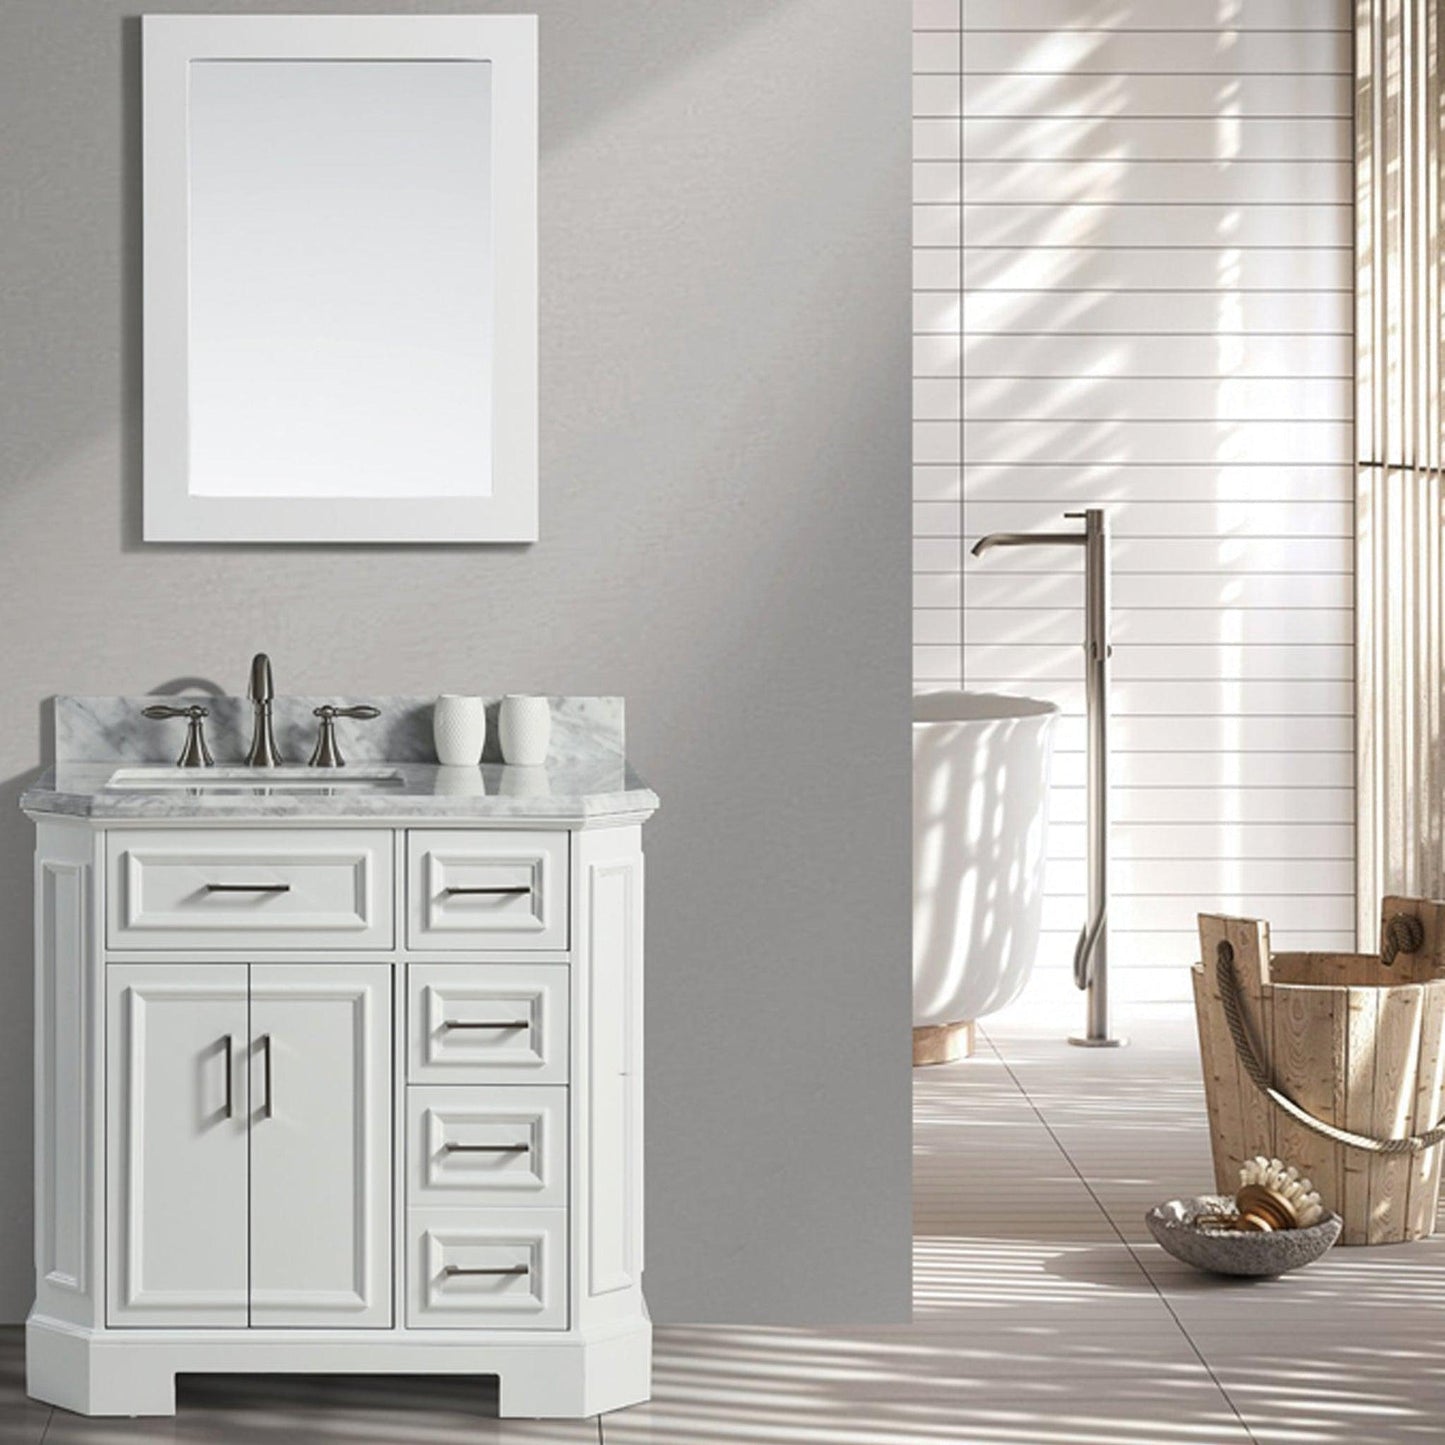 Eviva Glory 42" x 33" White Bathroom Vanity With Carrara Marble Countertop and Single Porcelain Sink